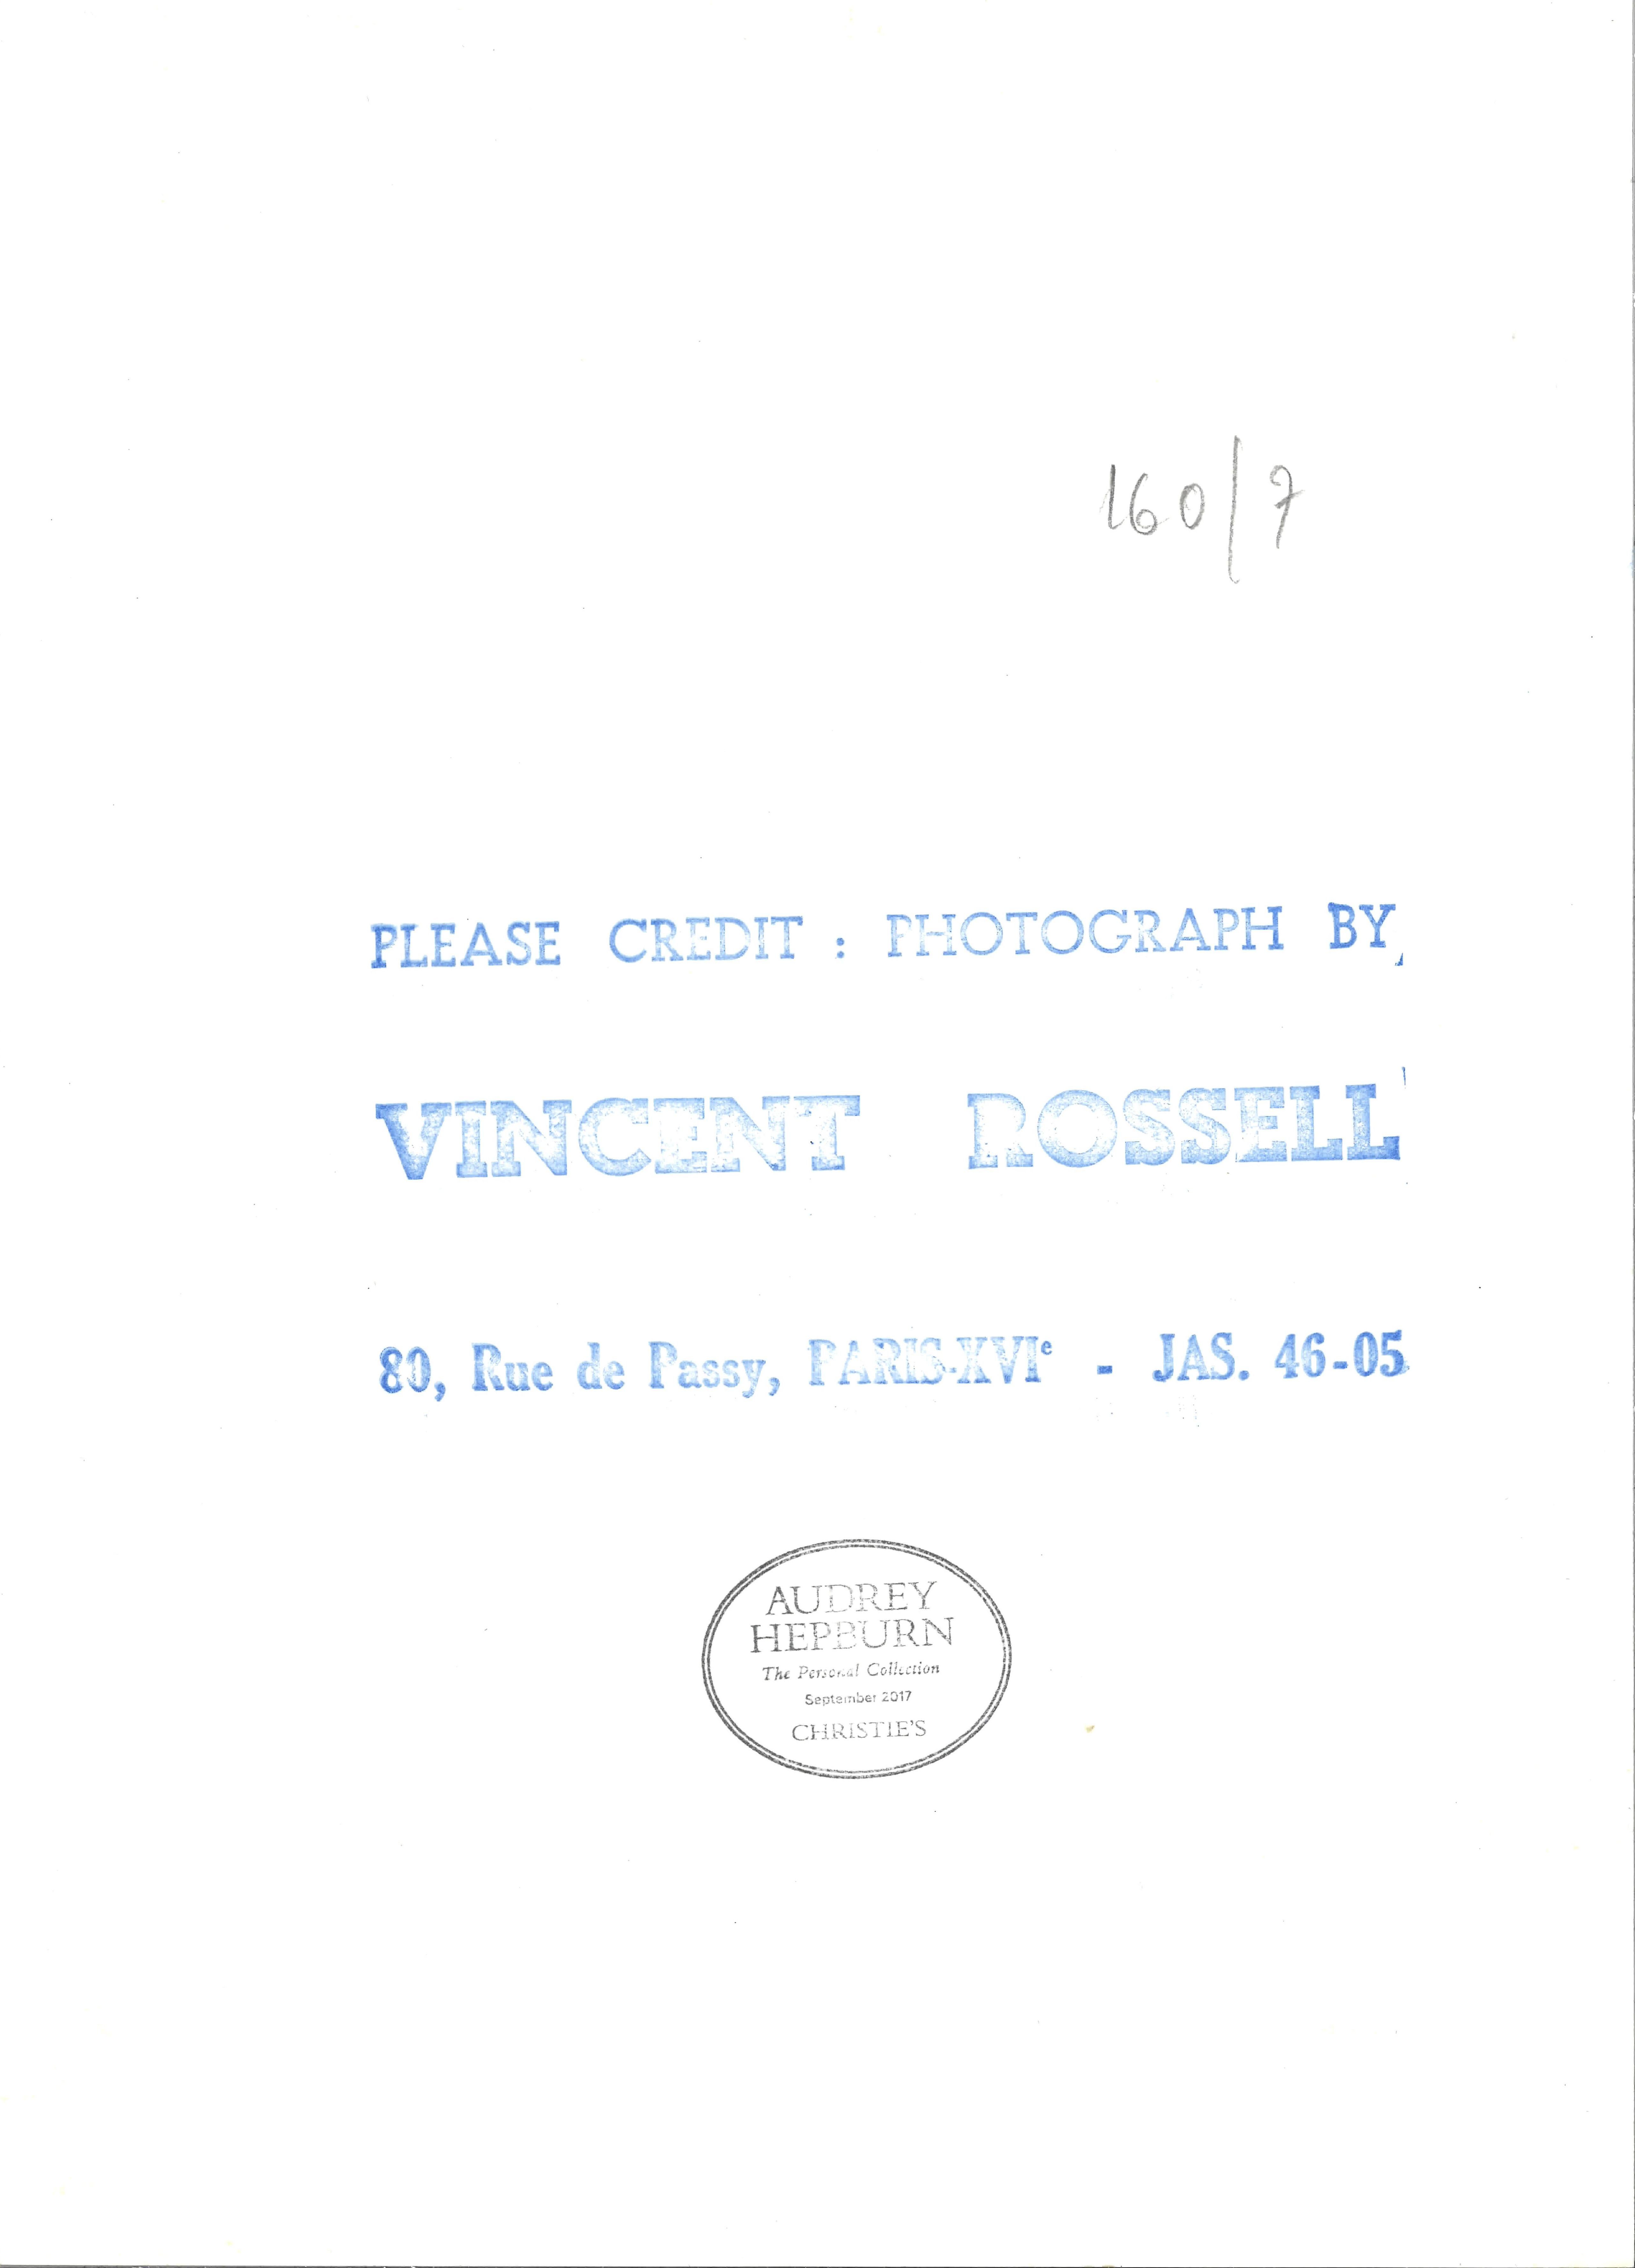 Audrey Hepburn on the set of Paris when it sizzles
Vintage gelatin silver print by Vincent Rossell
Photographer's credit stamp, Audrey Hepburn collection stamp and numerical notations verso
From the Personal collection of Audrey Hepburn,